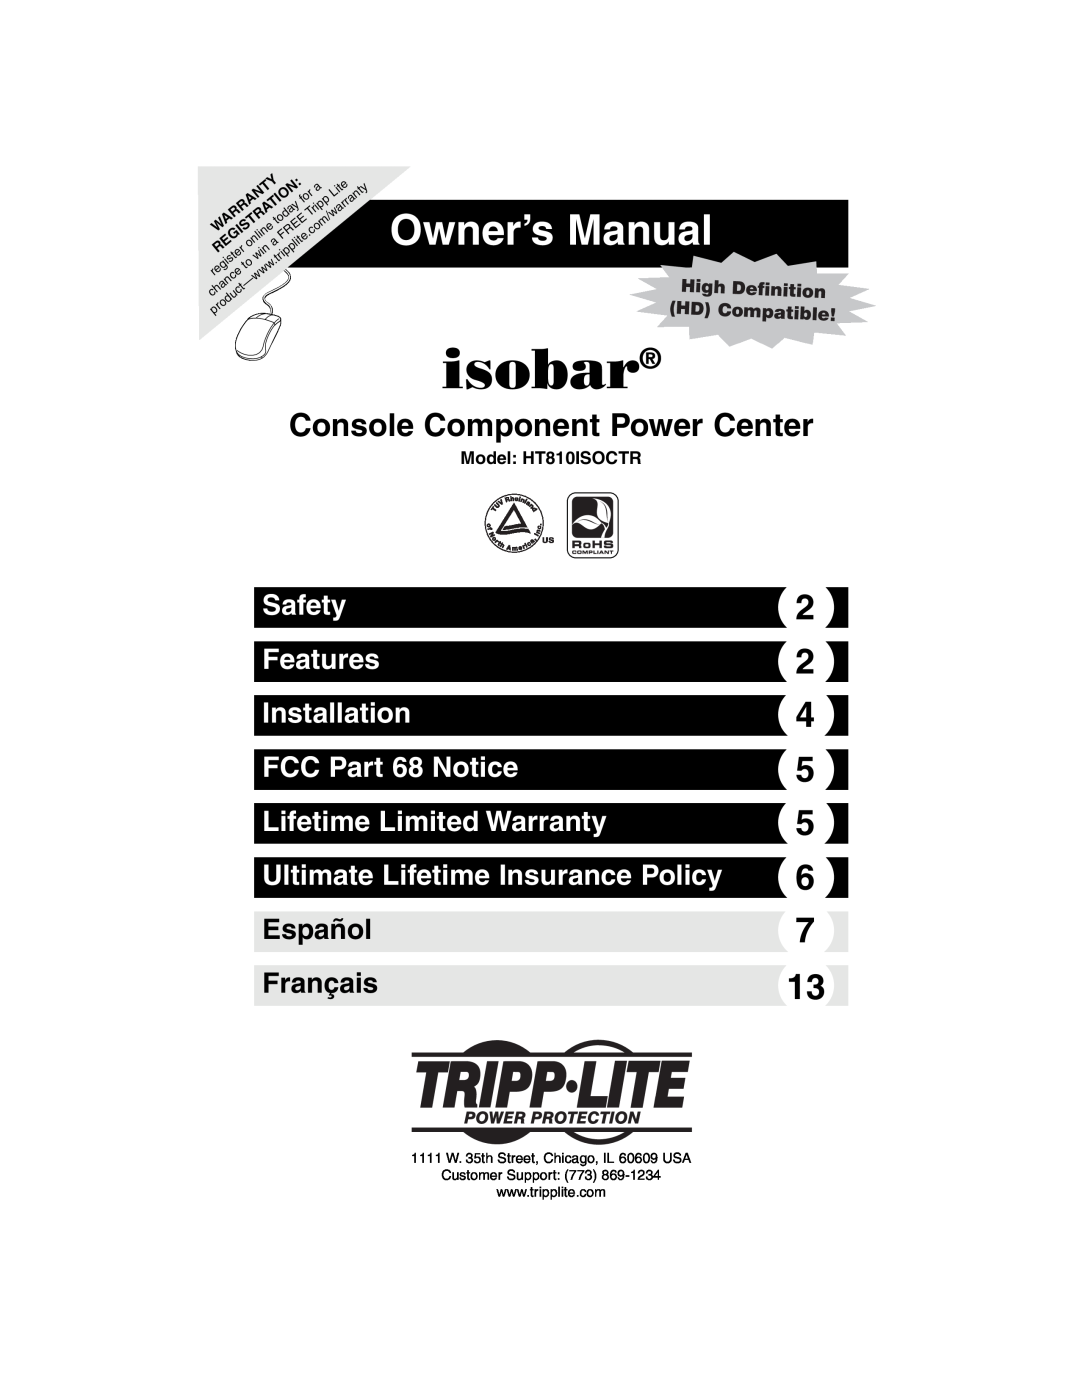 Tripp Lite owner manual Safety Features Installation FCC Part 68 Notice, Model HT810ISOCTR, isobar, Owner’s Manual 